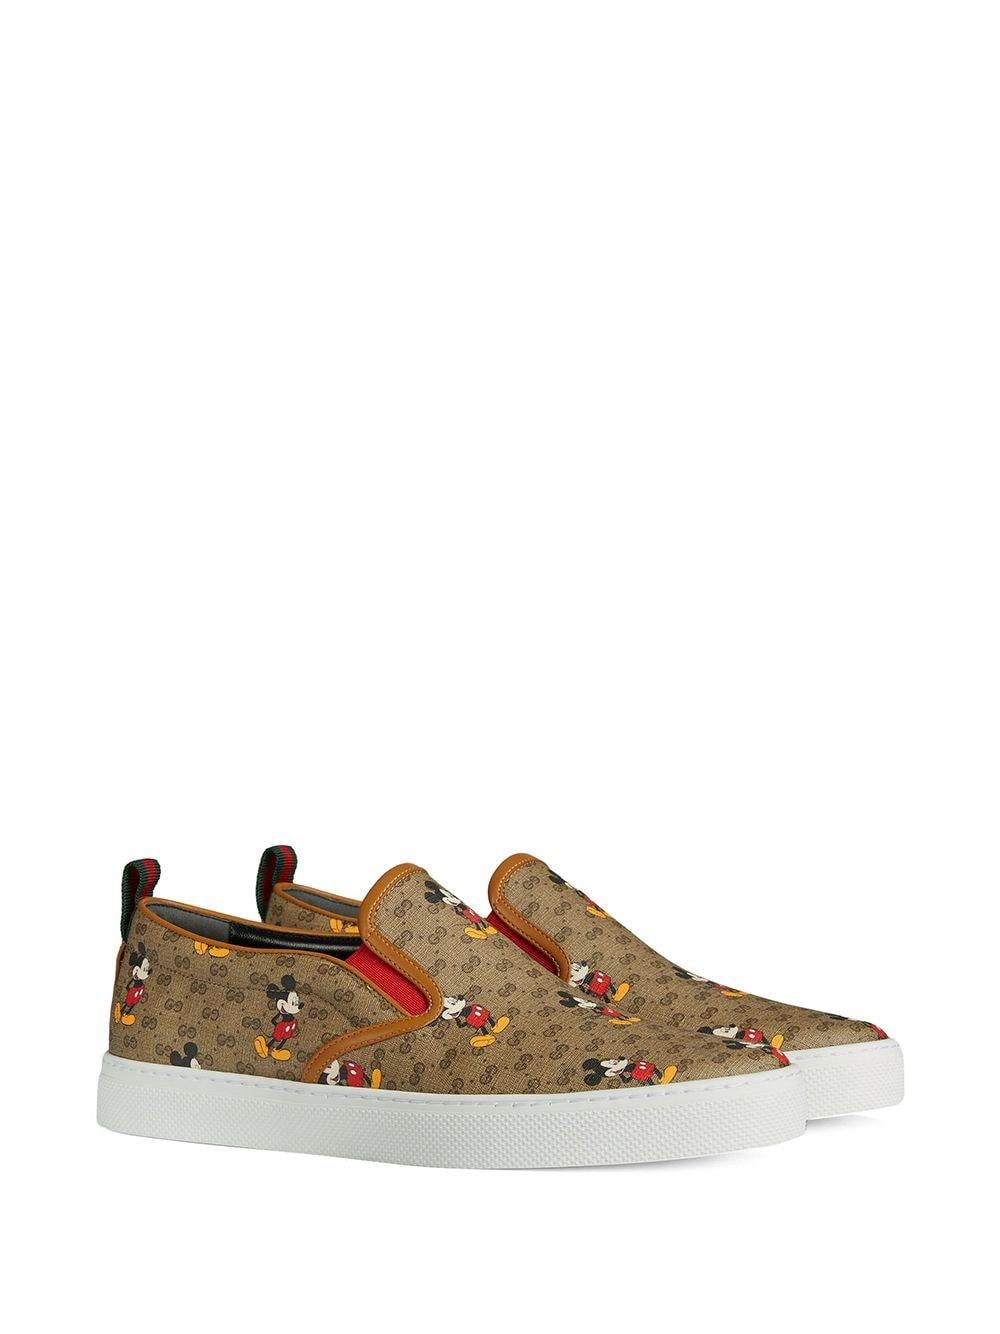 Gucci X Disney Mickey Slip-on Sneakers in Brown for Men | Lyst